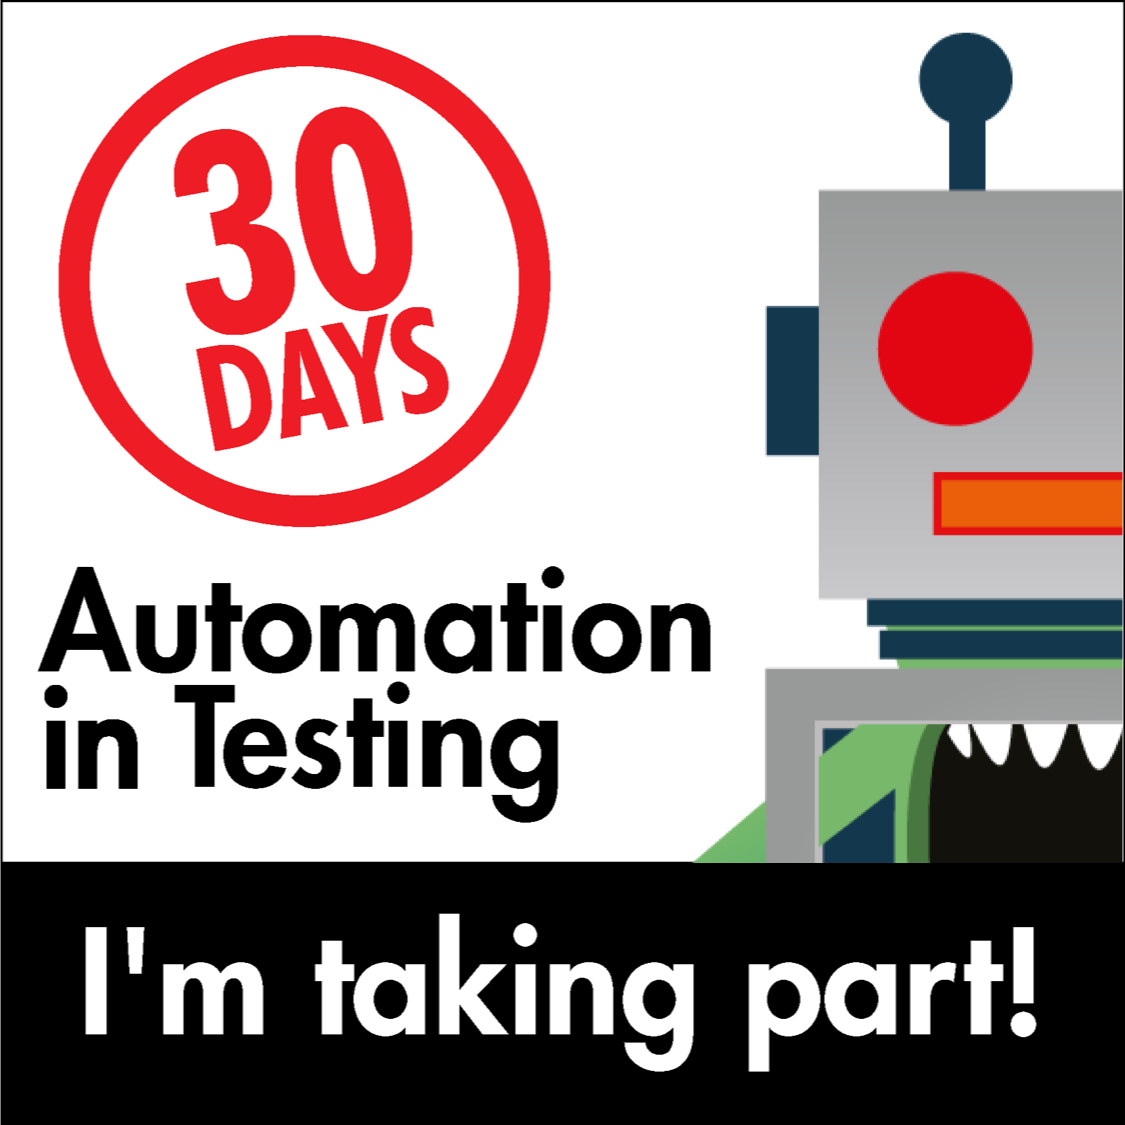 30 Days of Automation in Testing